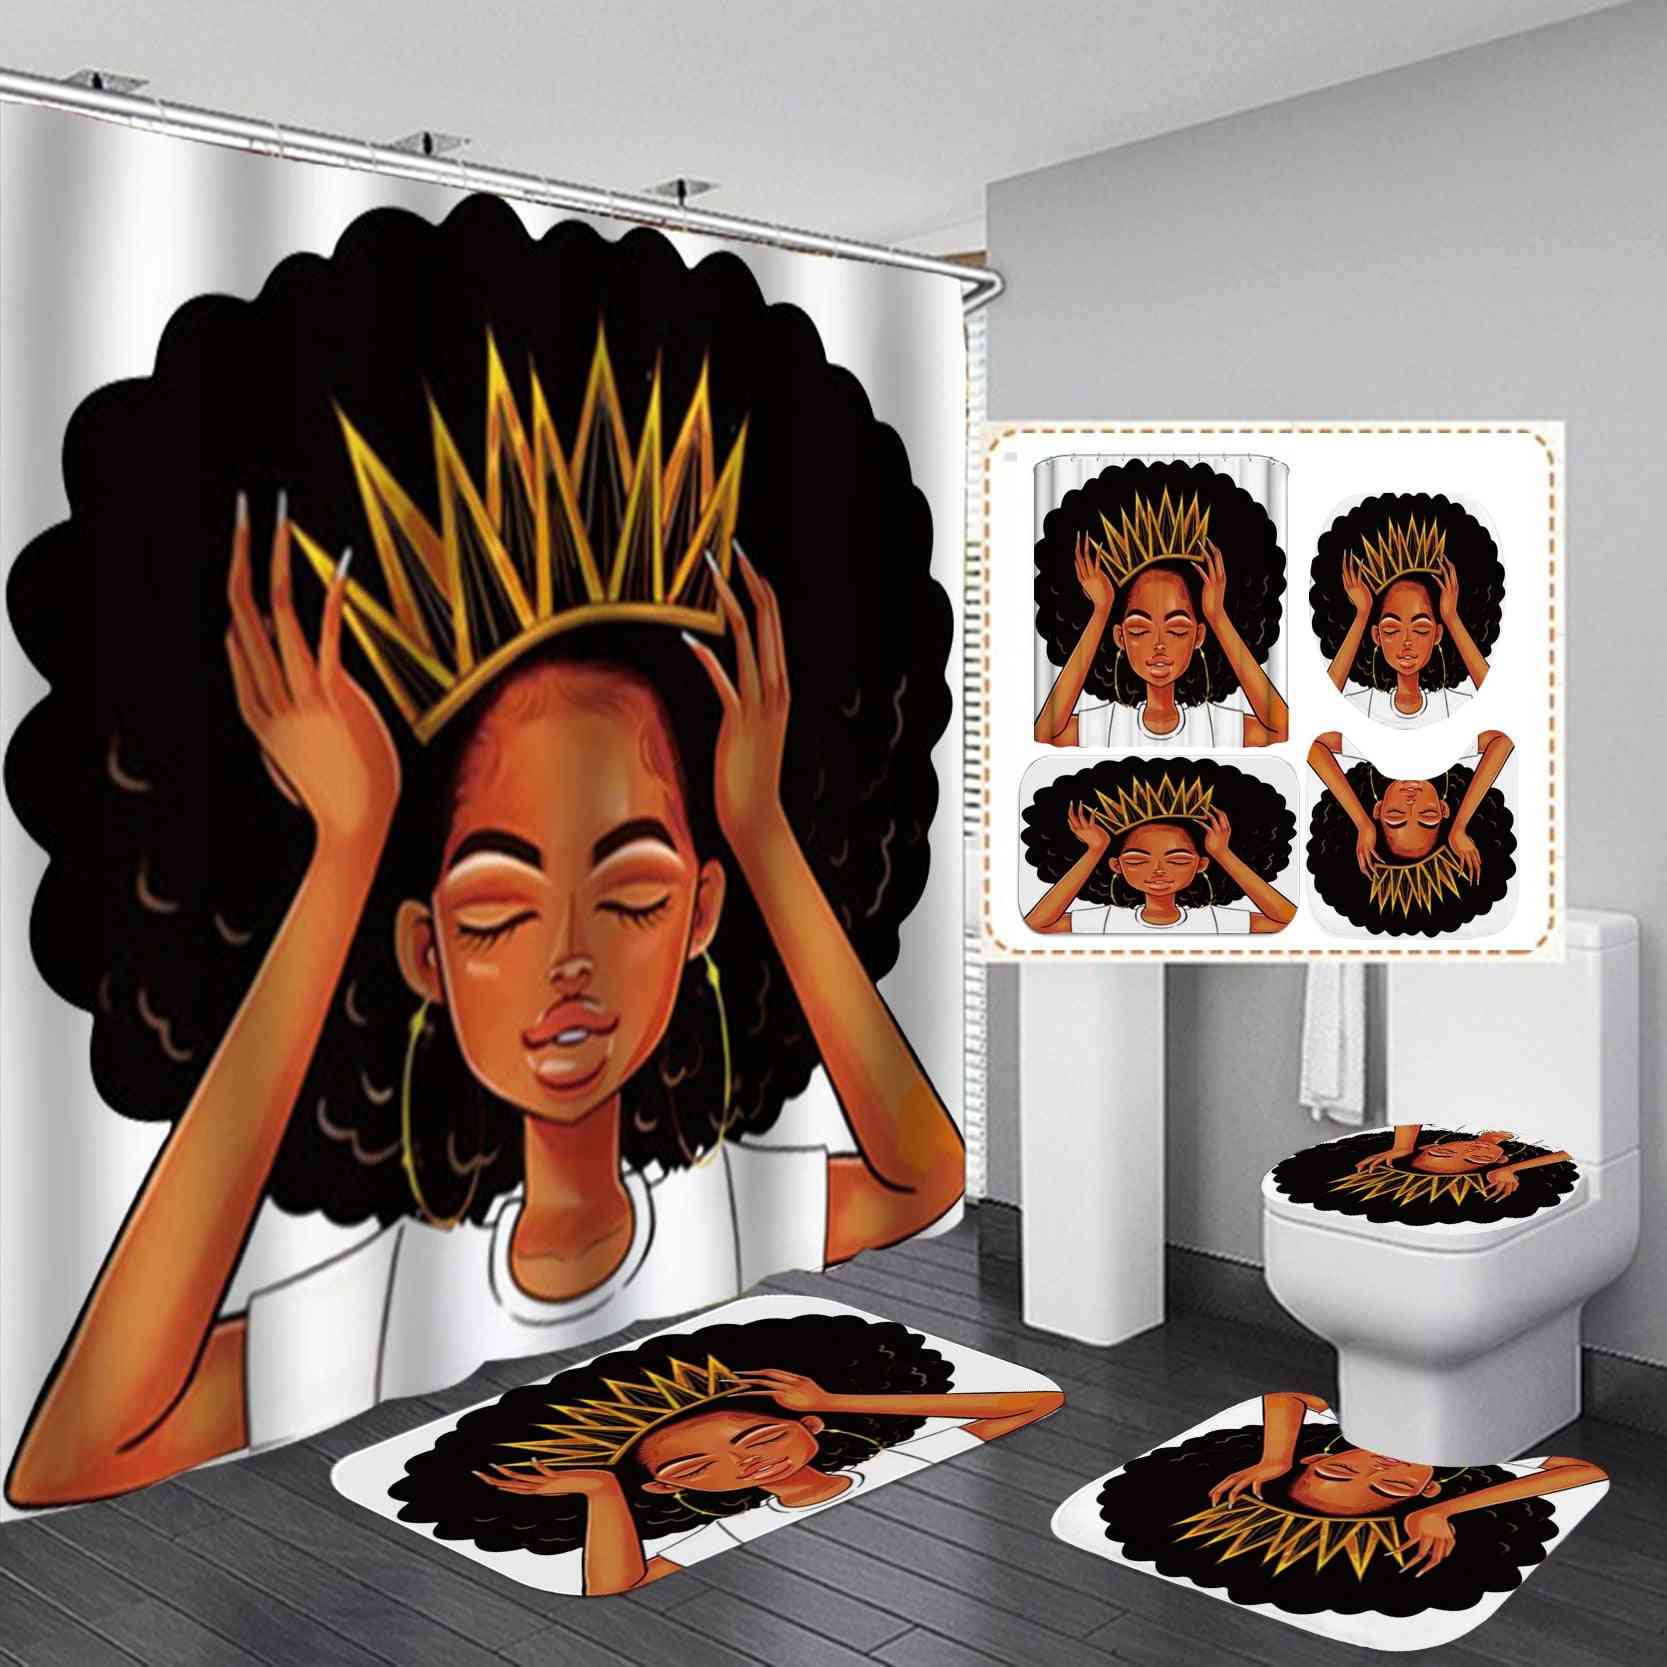 African American Women With Crown Shower Curtain Queen Princess Bath Curtains With Rugs Toilet Seat Cover Set